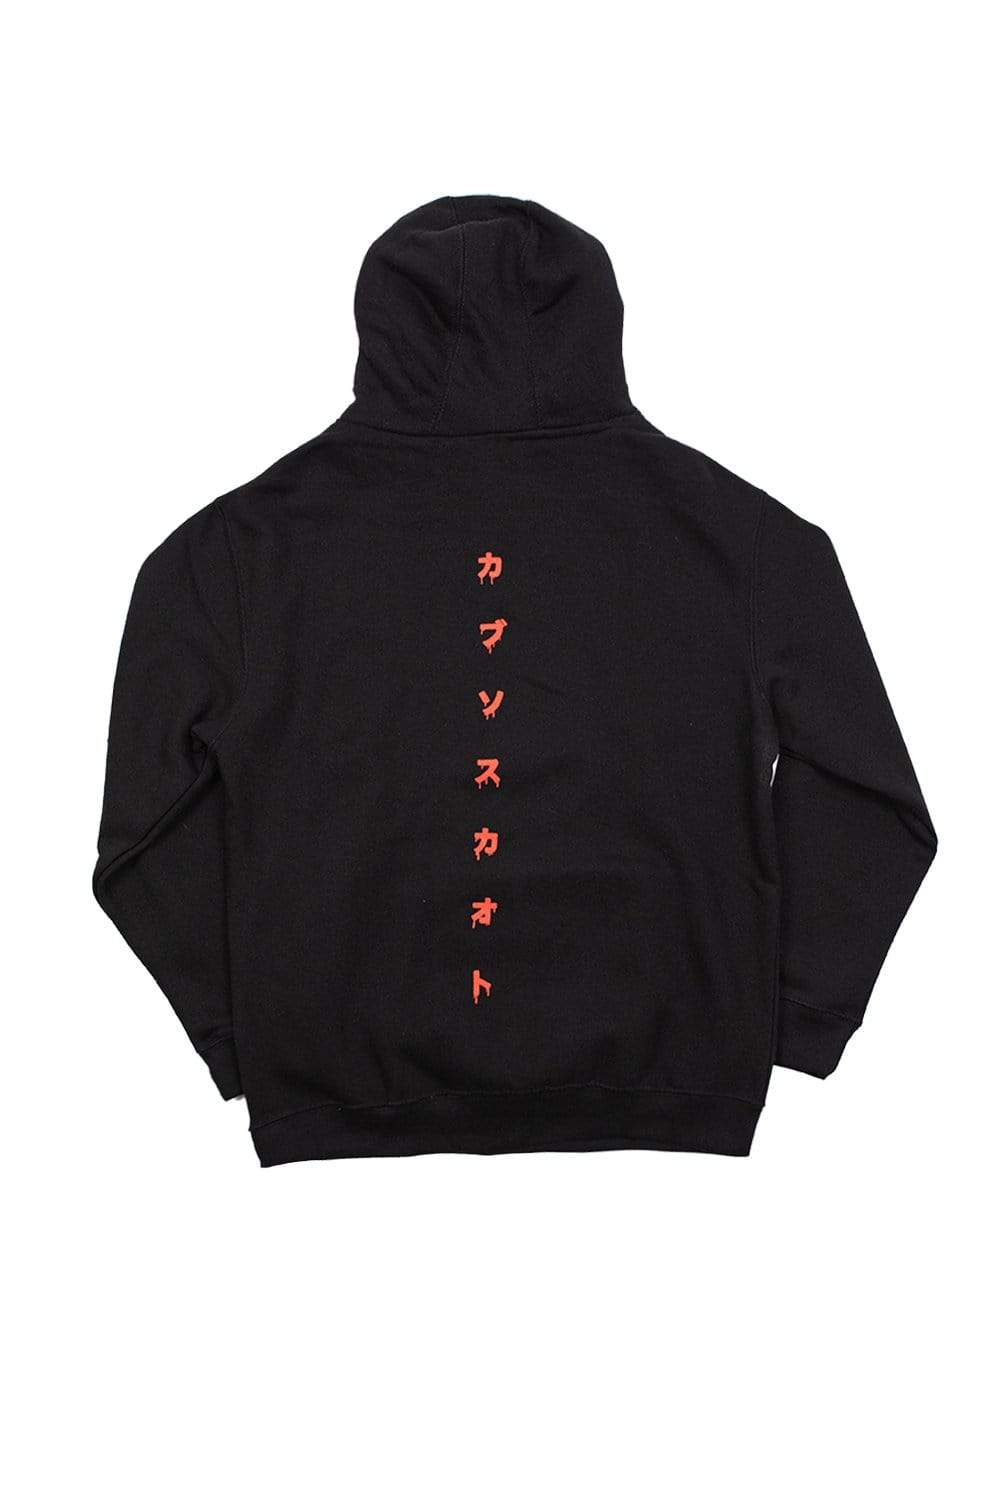 Kubz Scouts 'End Your Lifu' Signature Hoodie –